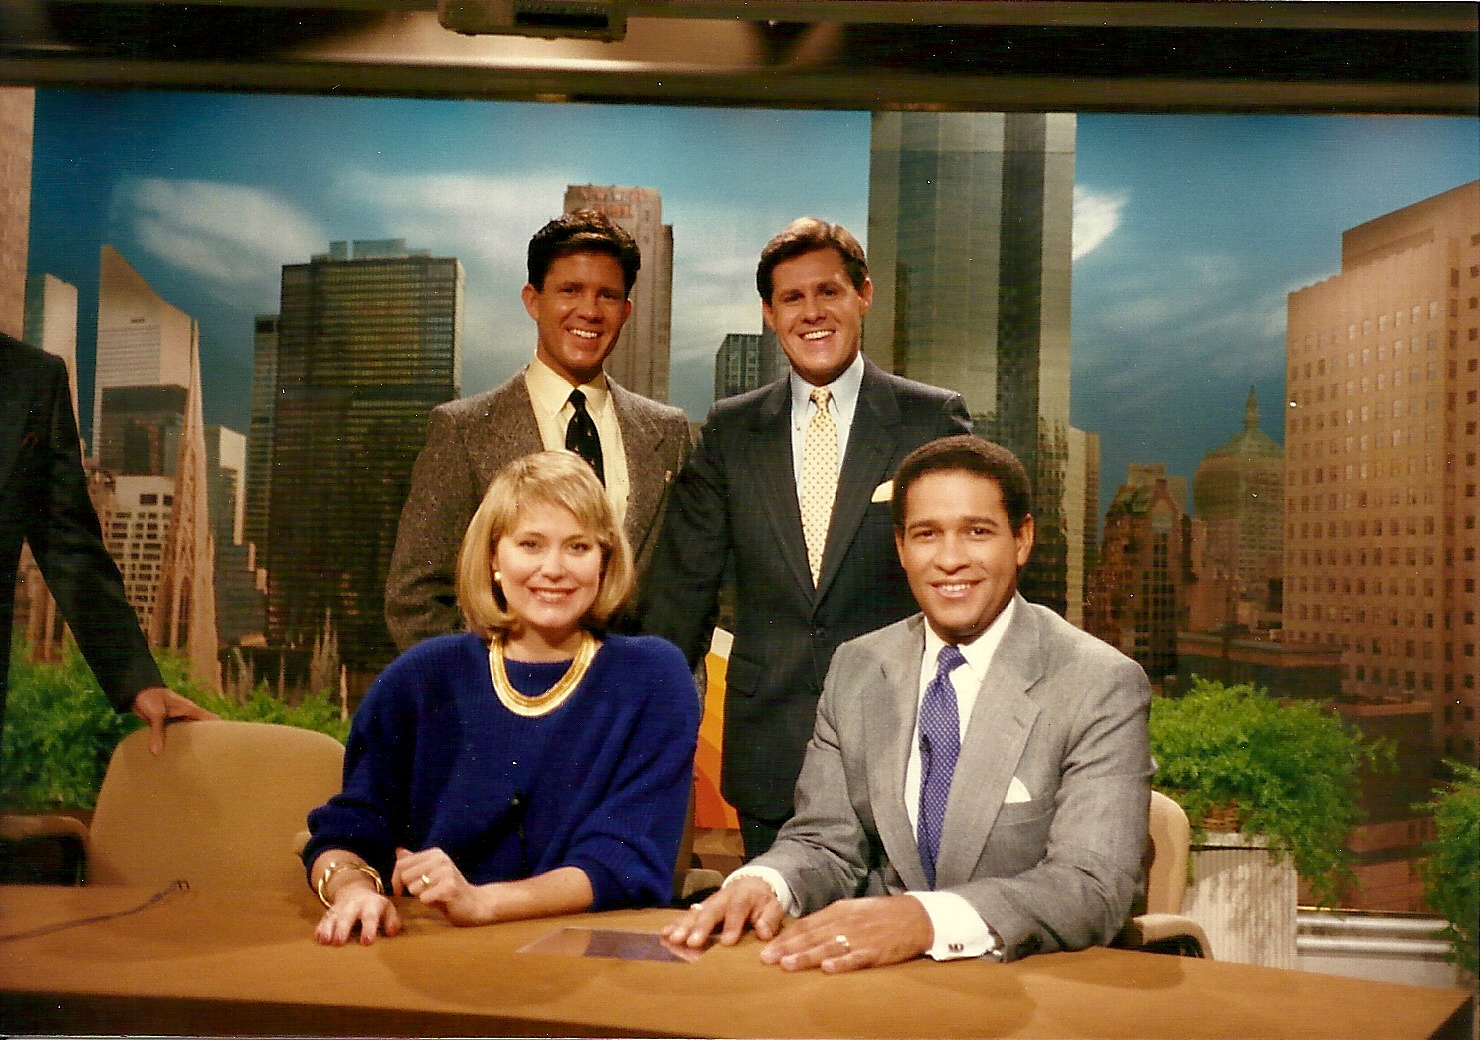 On the Today Show set with Bryant Gumbel and Jane Pauley.